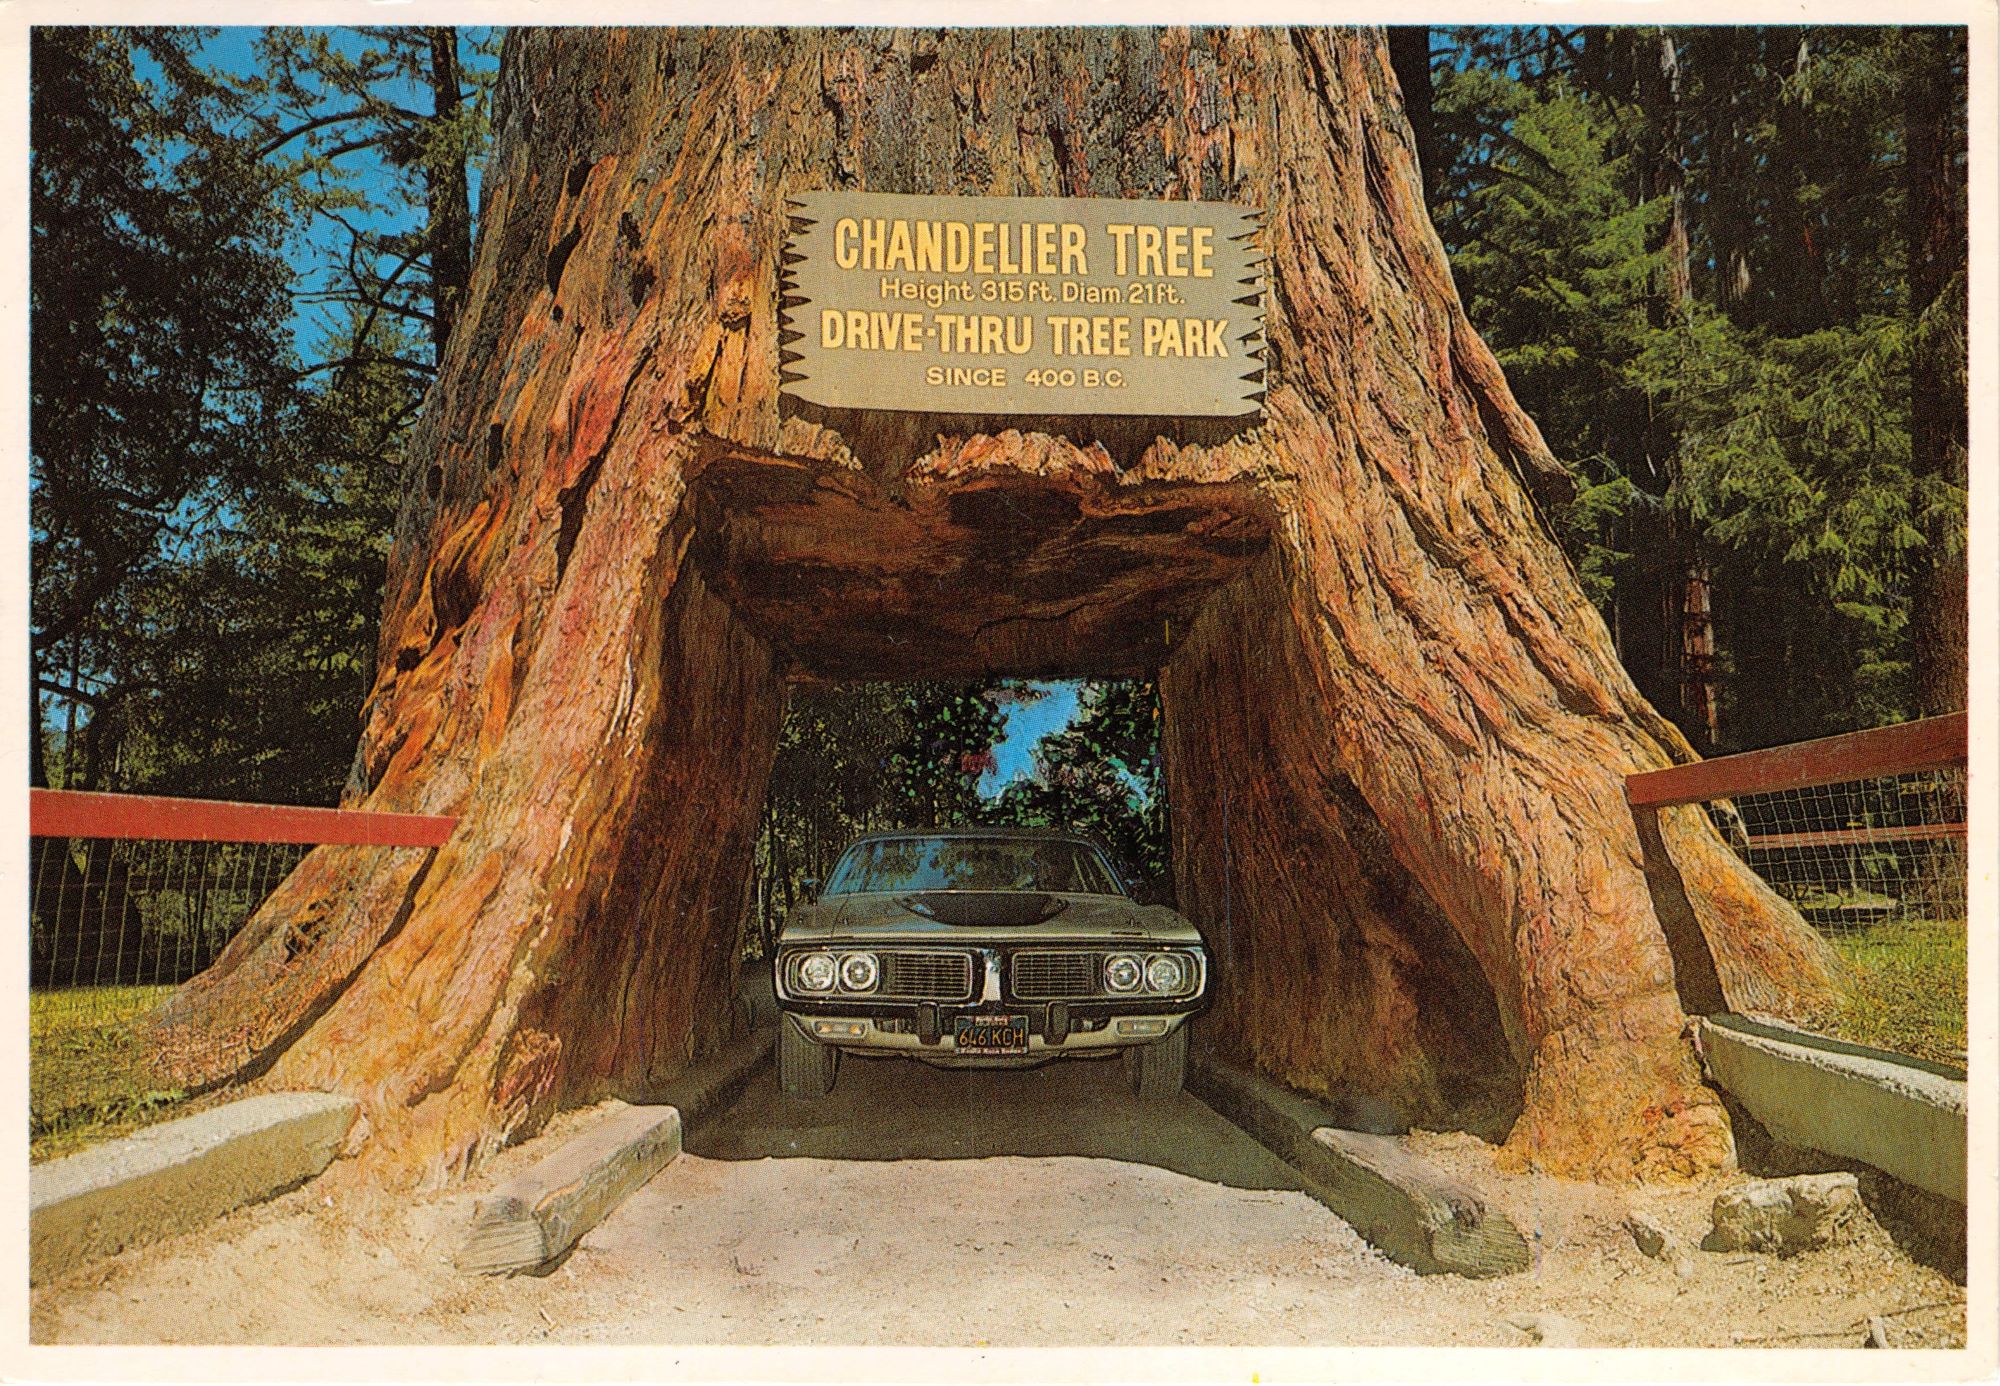 A large drive thru Redwood tree with a car driving through it.